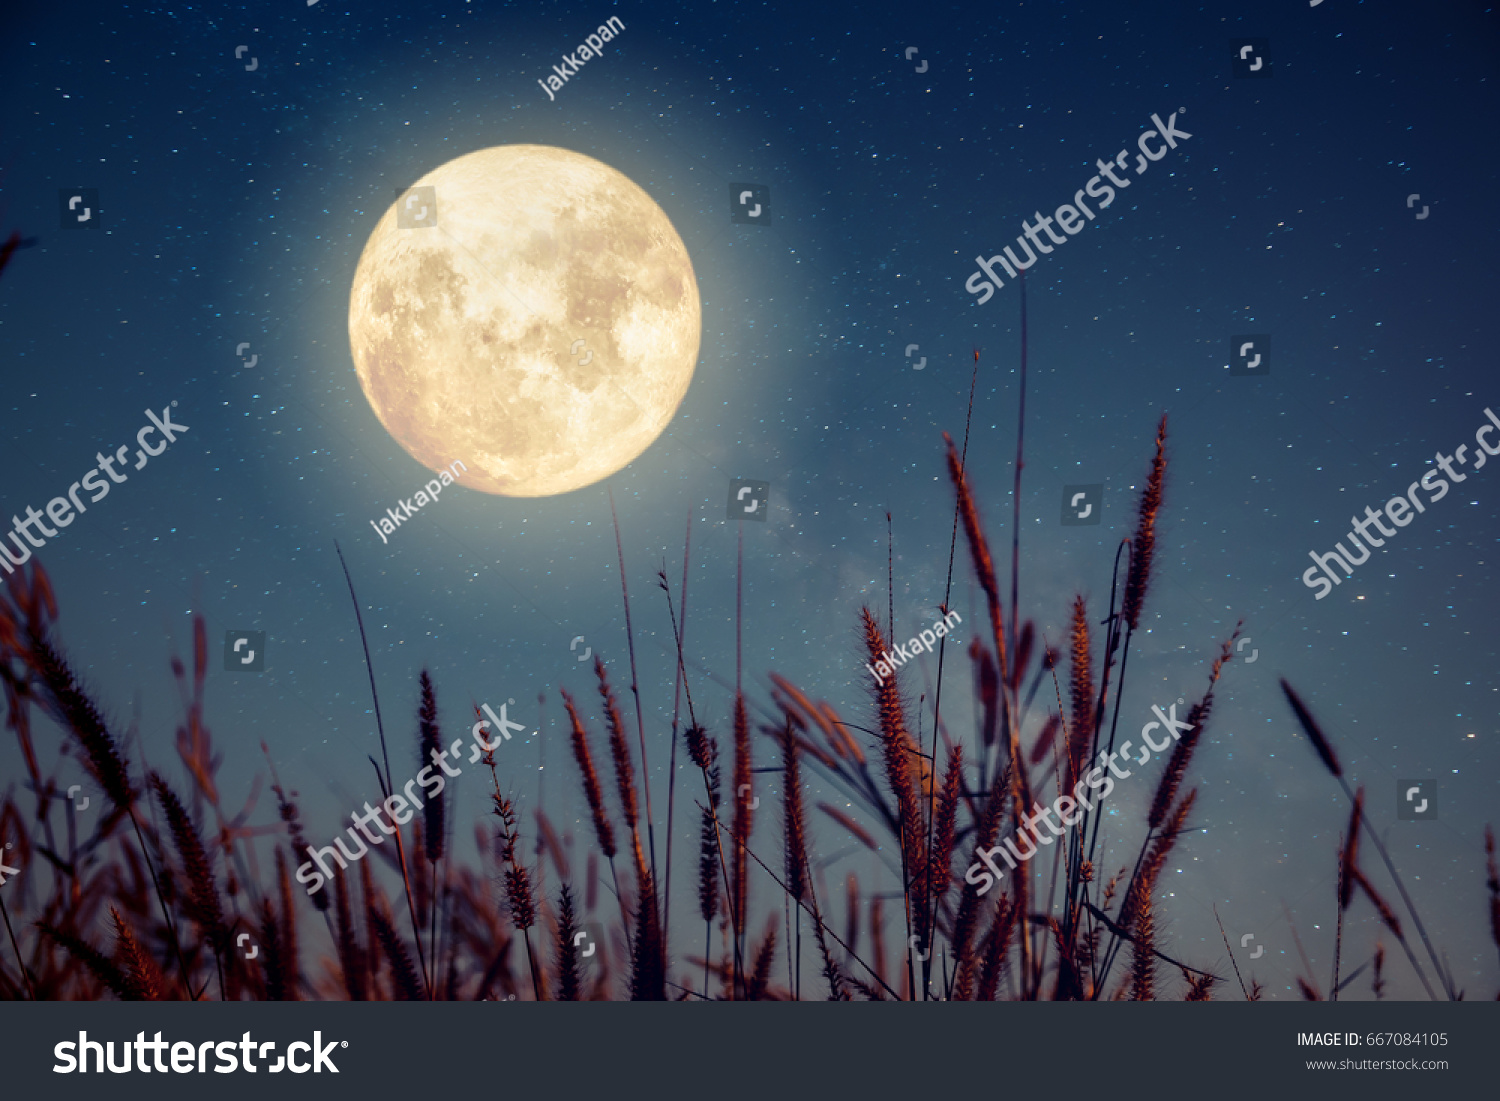 Beautiful autumn fantasy - wild flower in fall season and full moon with milky way star in night skies background. Retro style artwork with vintage color tone #667084105